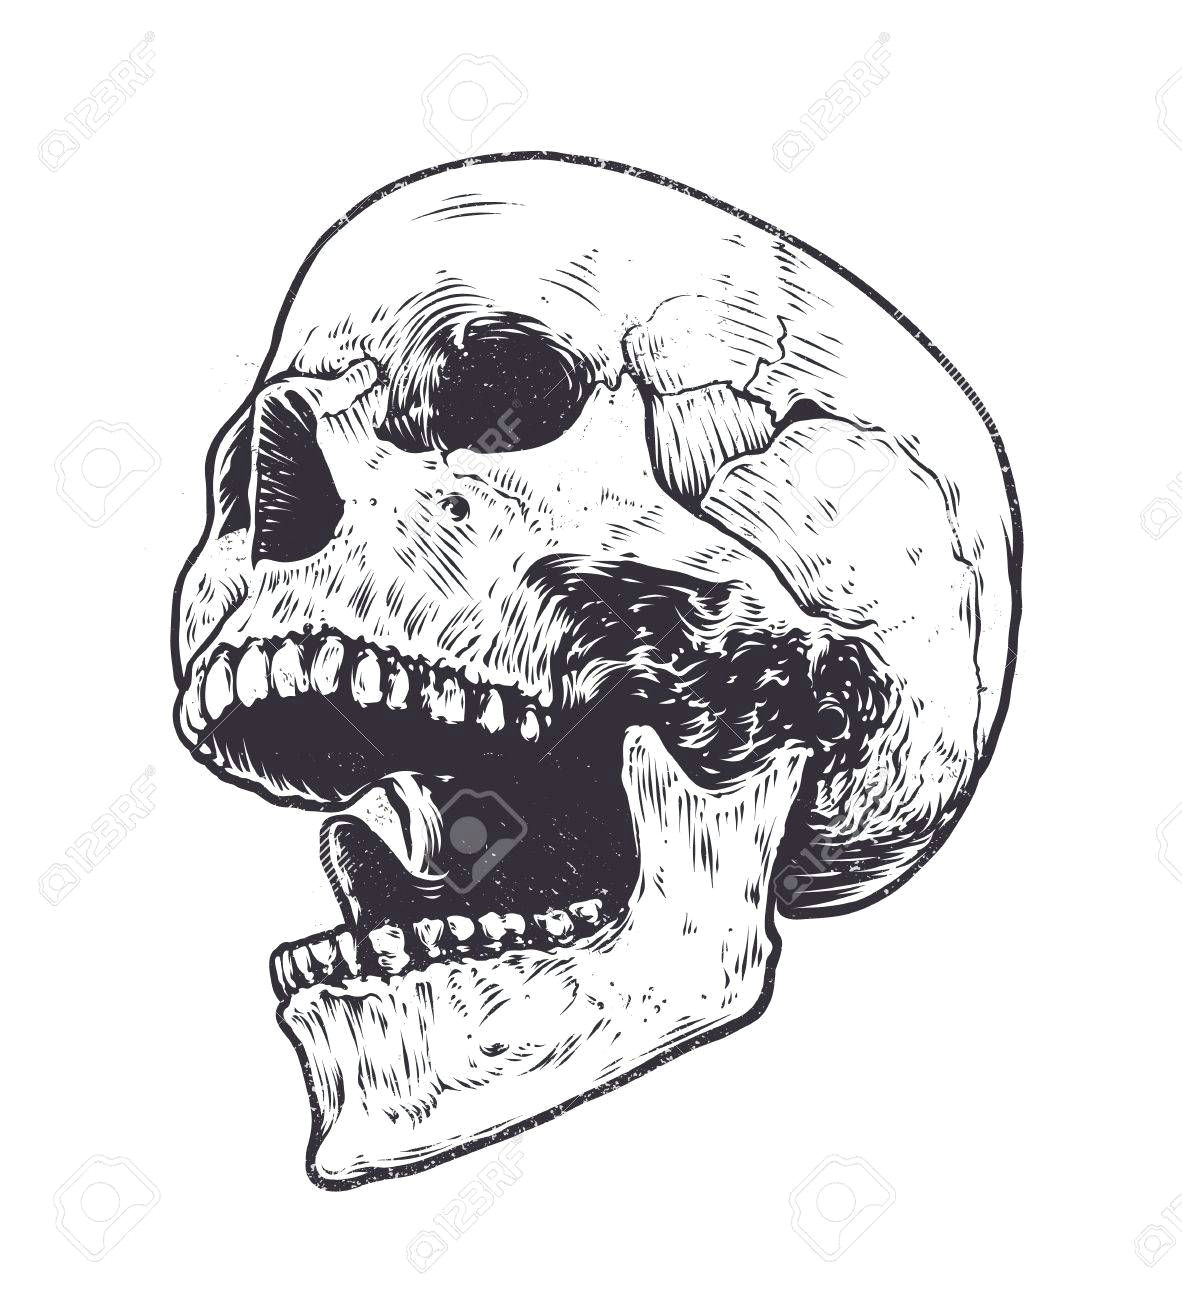 Practice Drawing Skulls Image Result for Skull Open Mouth Drawing Tattoo Projects